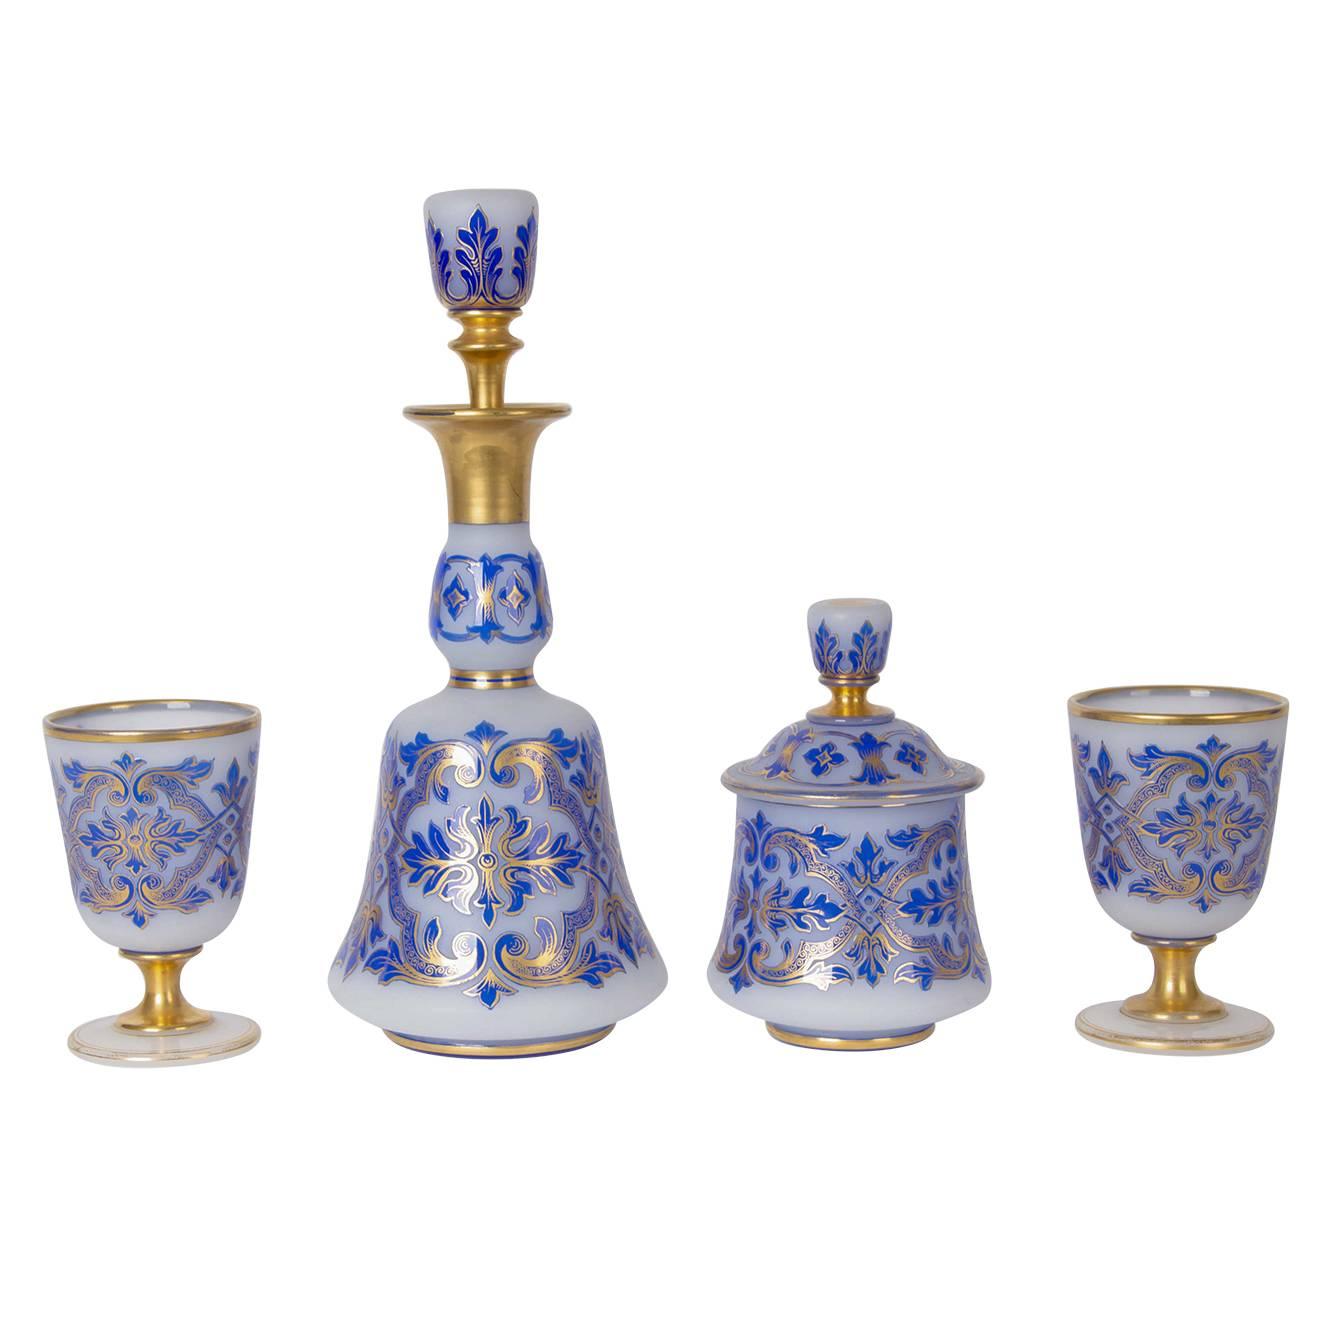 Four-Piece Luxury Drinking Set with Blue Glass Overlay